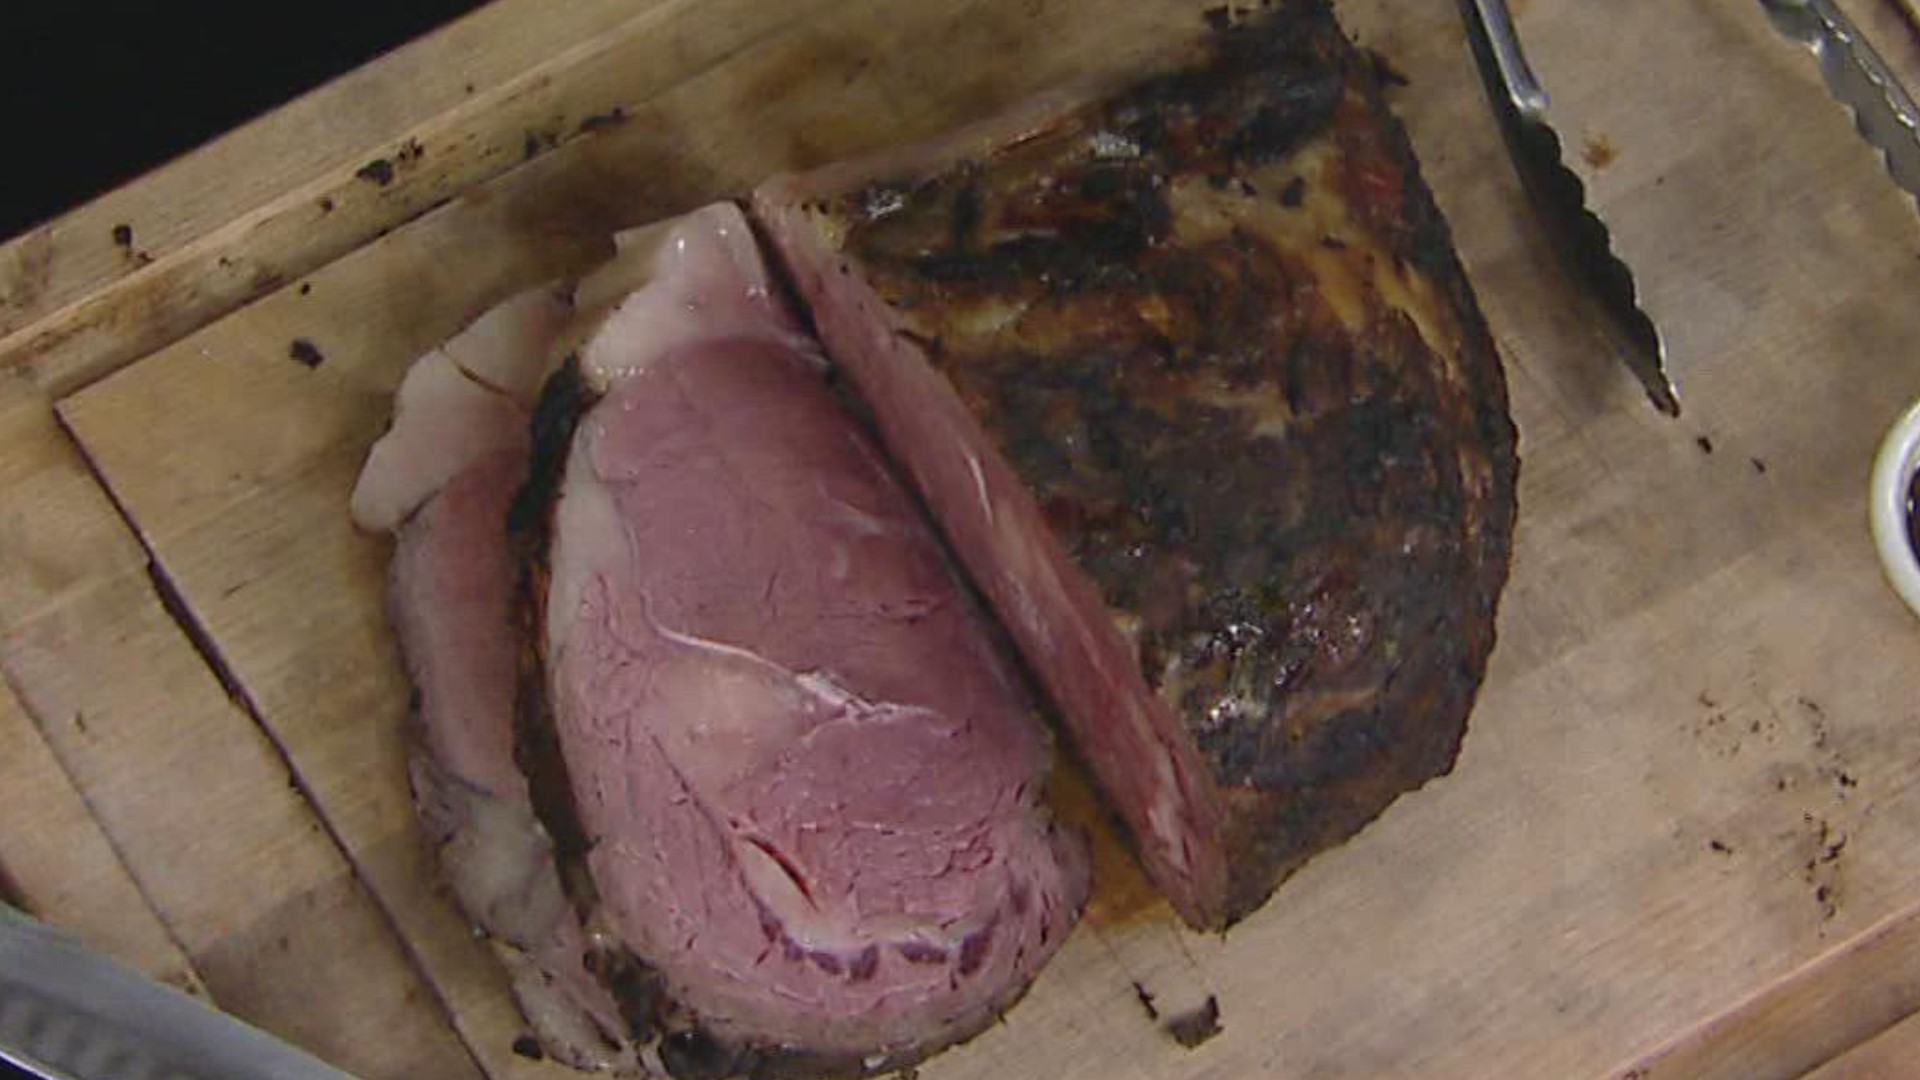 Chef Grant Halsne from The Creekside Supper Club joined KARE 11 Saturday to show his recipe for prime rib with a horseradish cream.